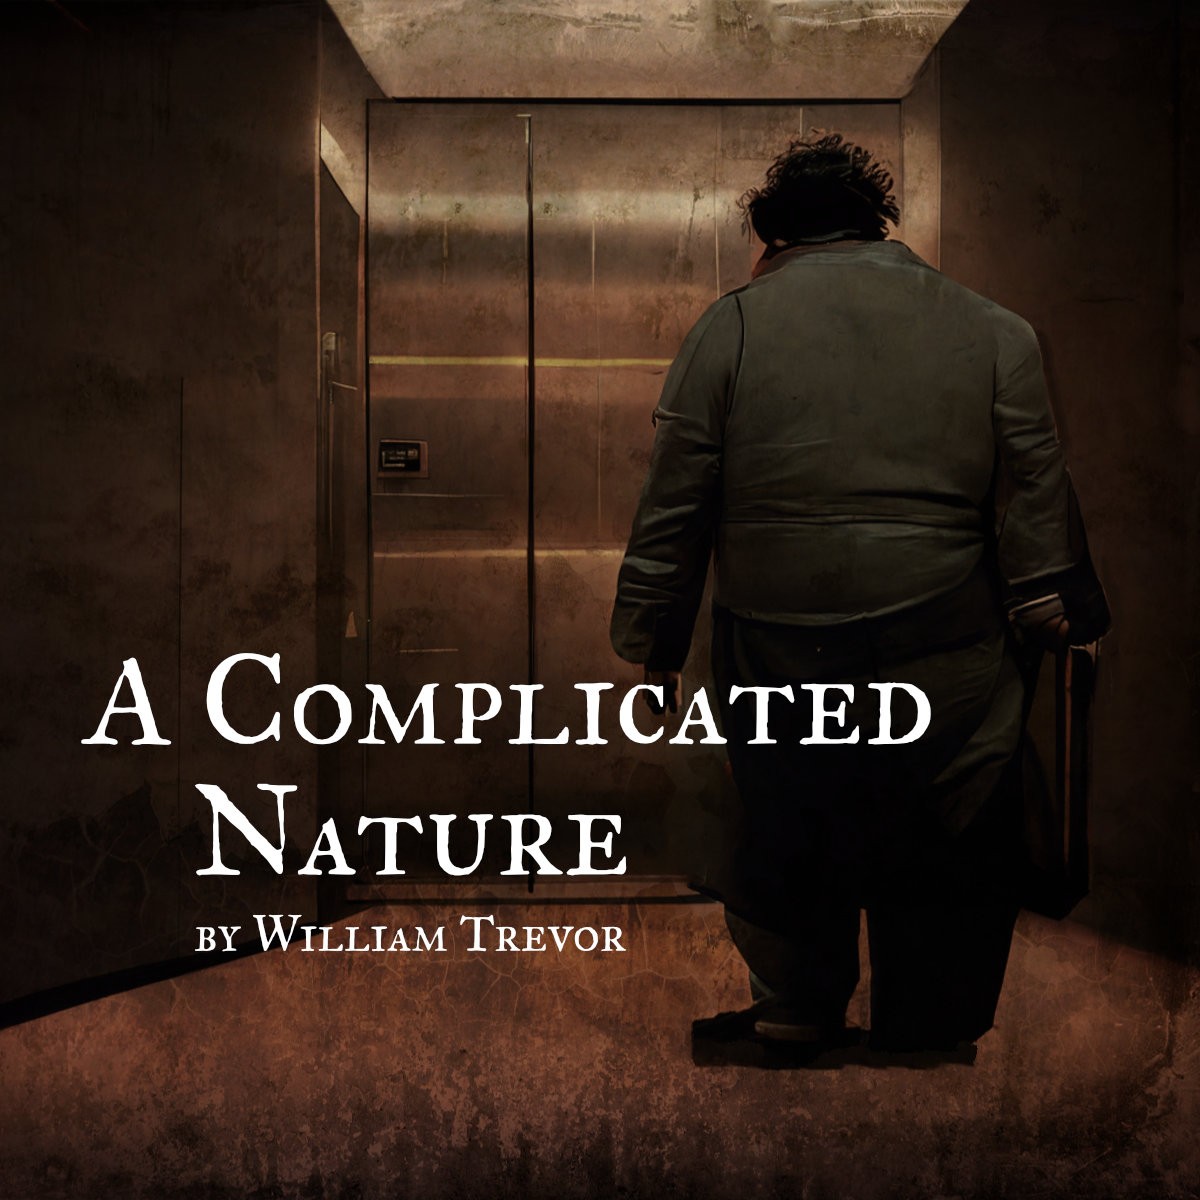 A Complicated Nature by William Trevor Short Story Analysis